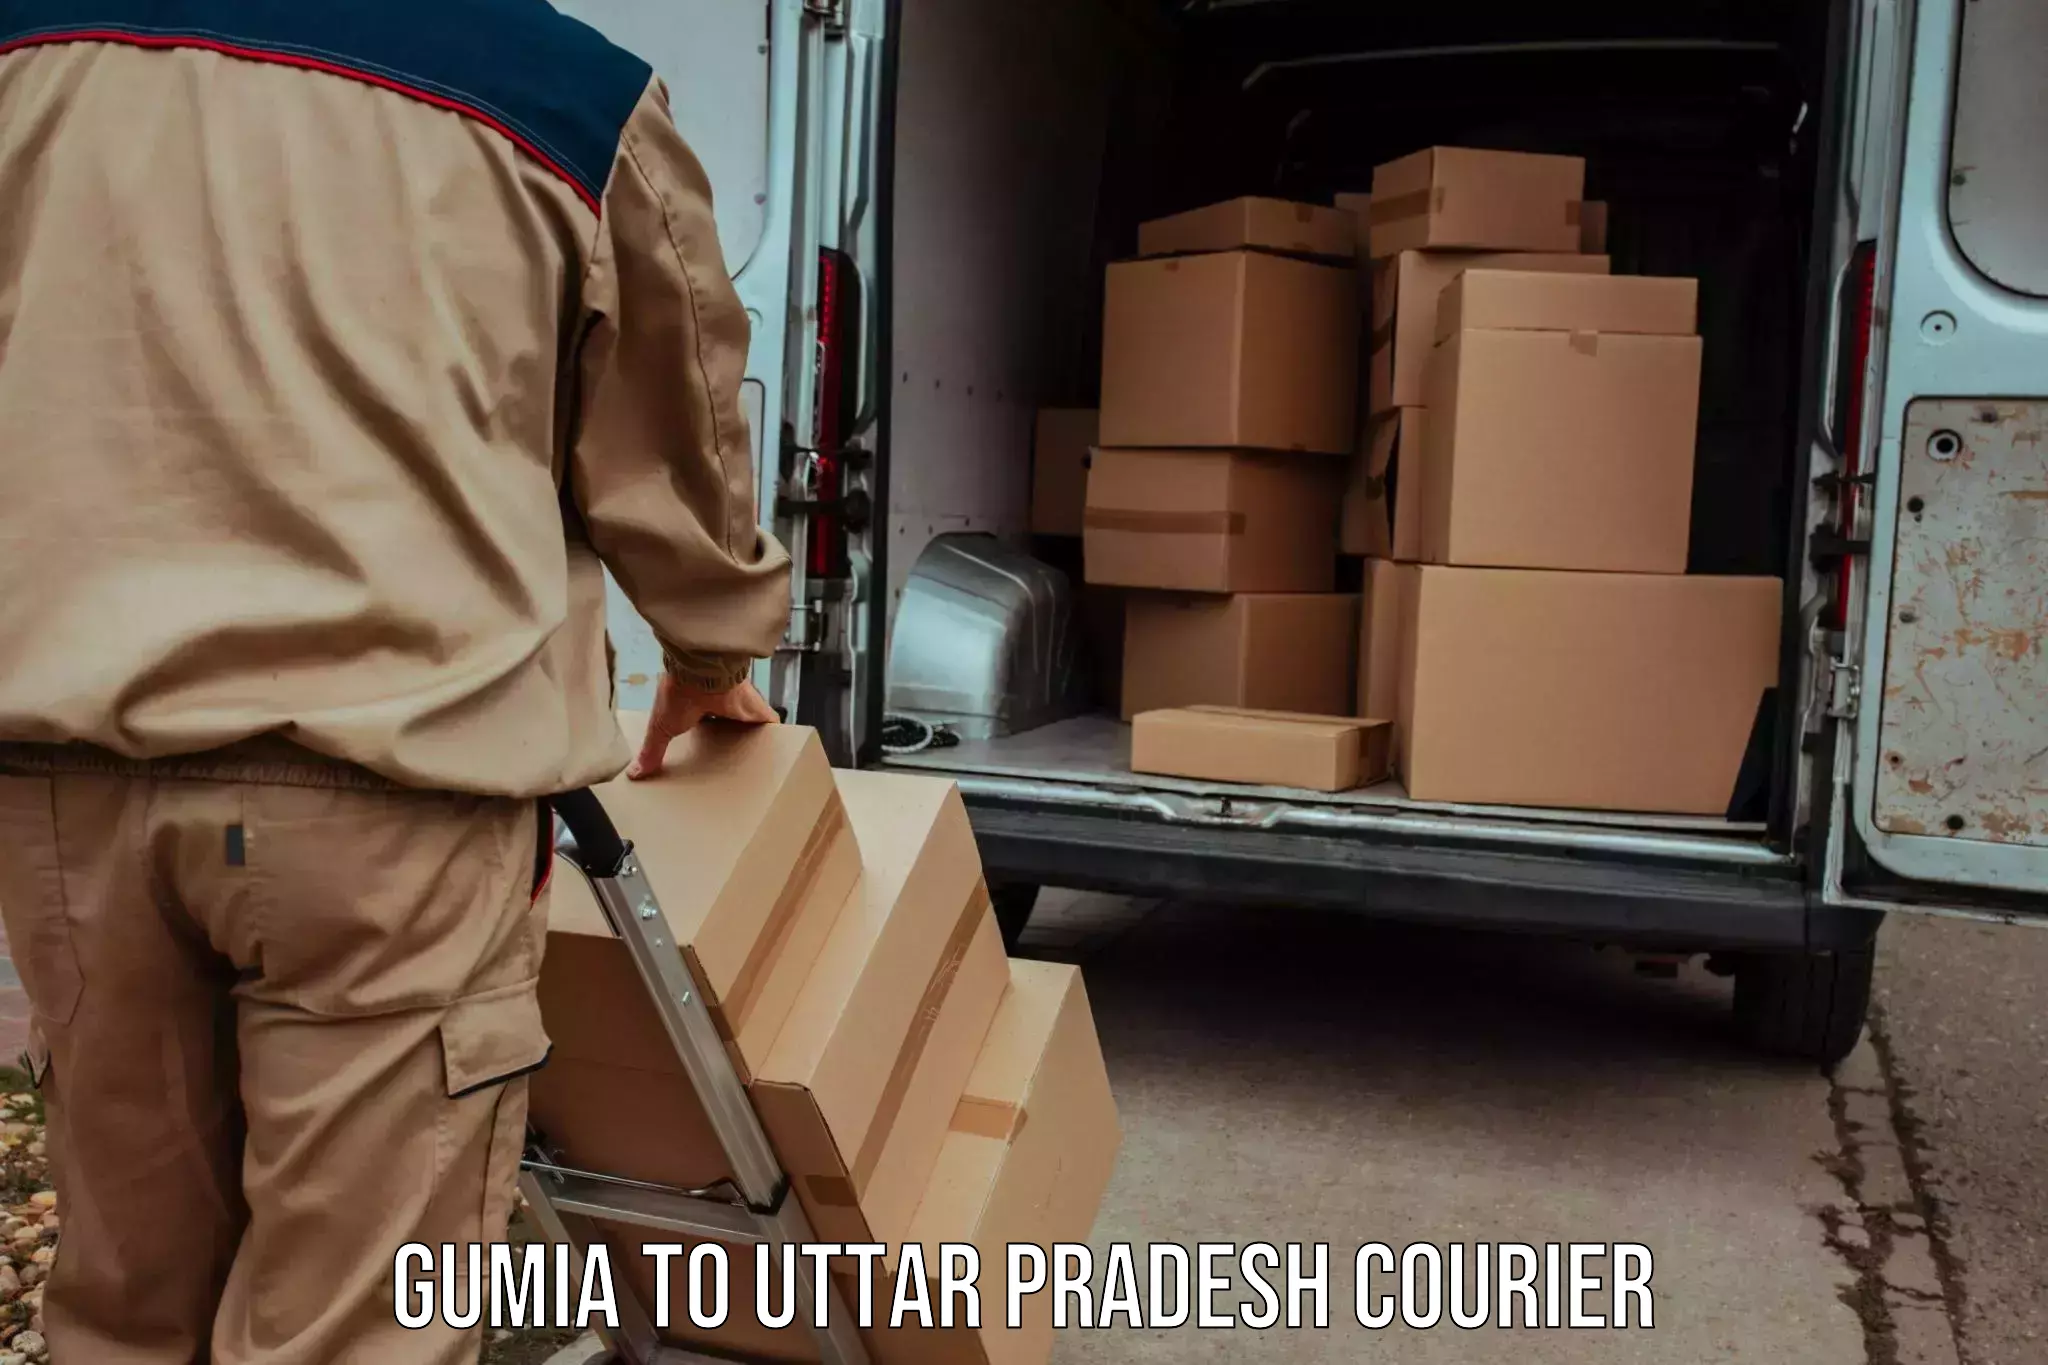 Next-day delivery options Gumia to Uttar Pradesh